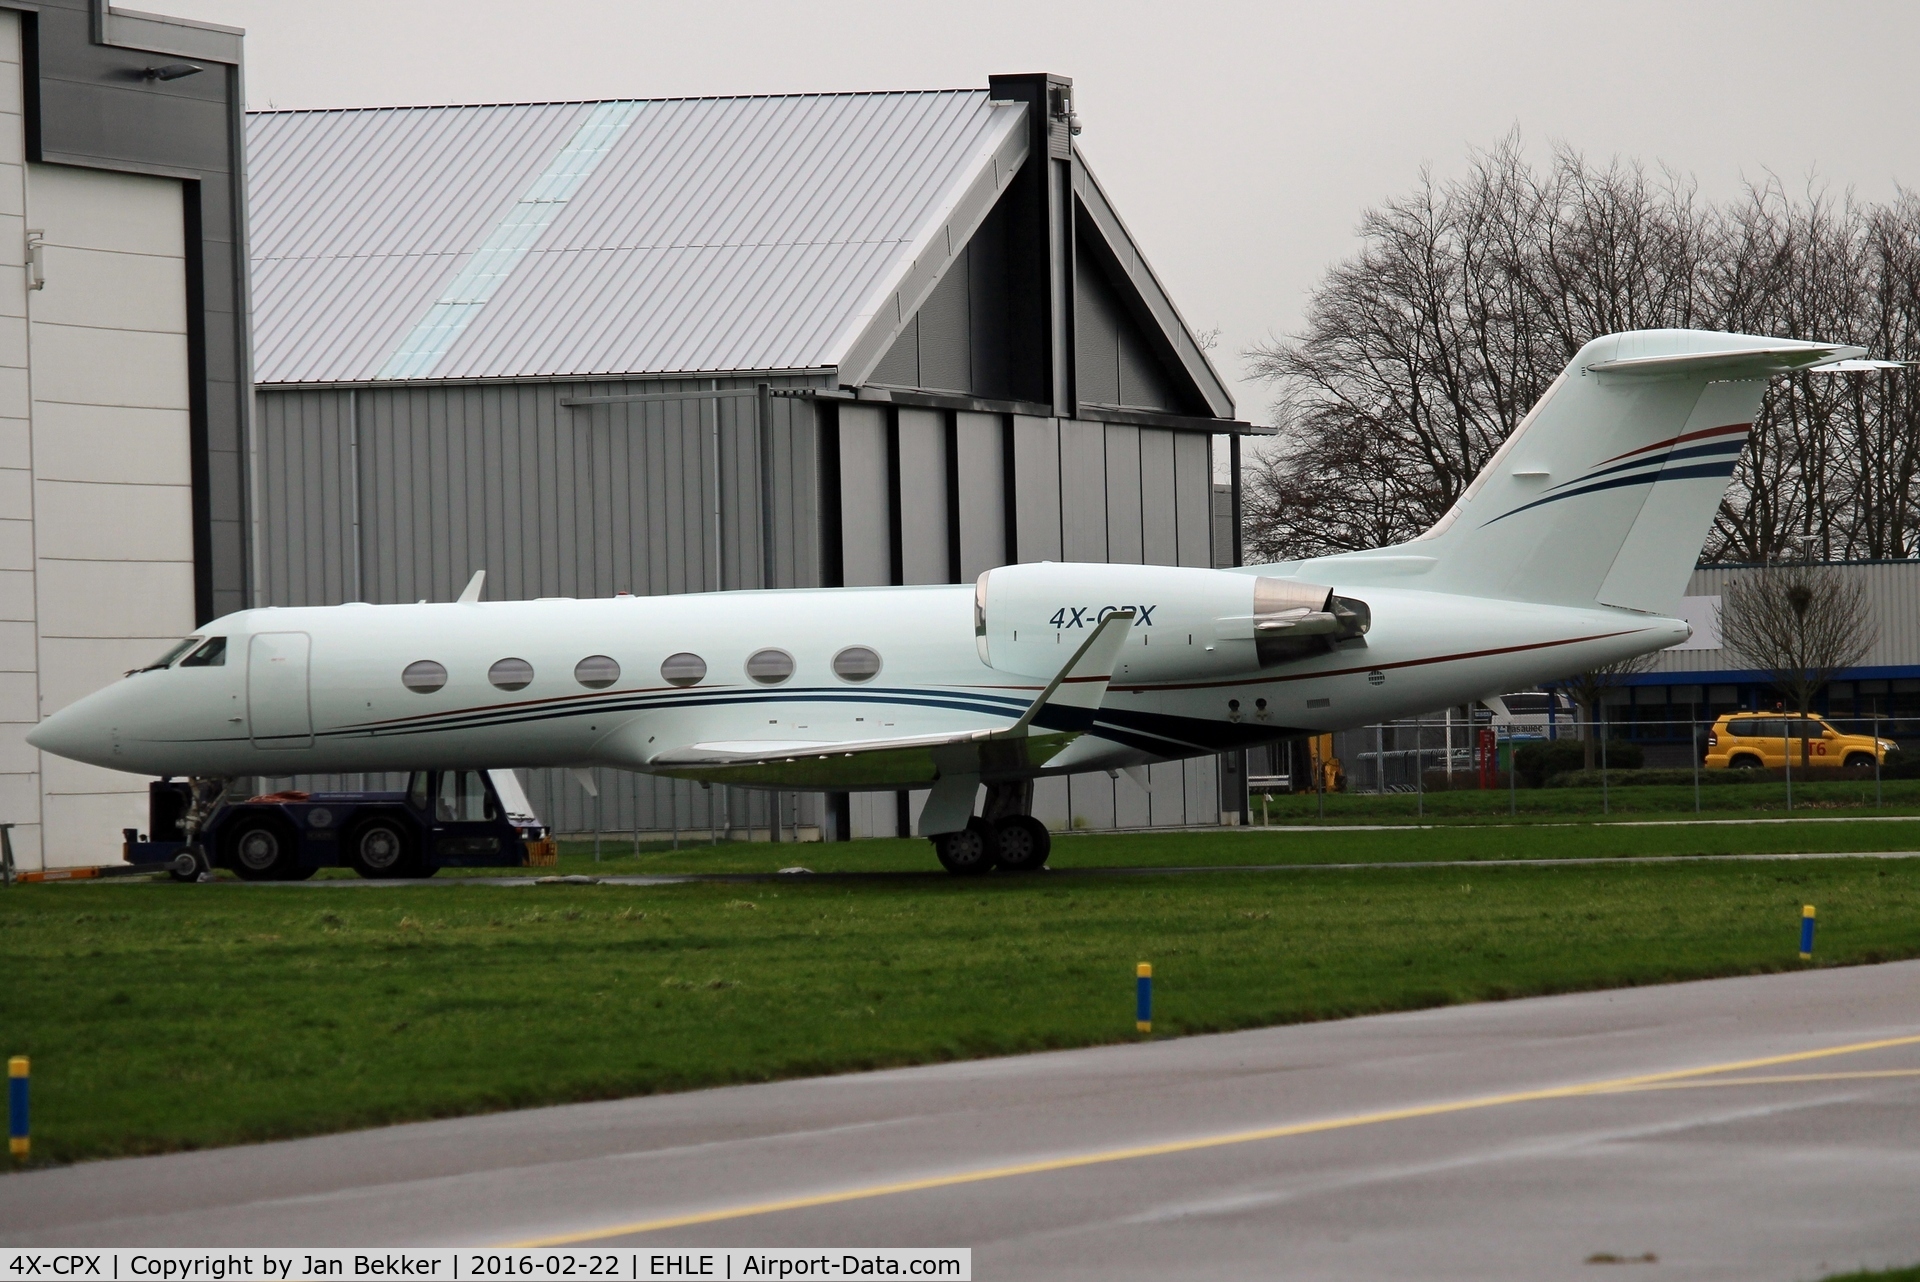 4X-CPX, 2002 Gulfstream Aerospace Gulfstream IV C/N 1481, Lelystad Airport. In front of QAPS where it got a new livery